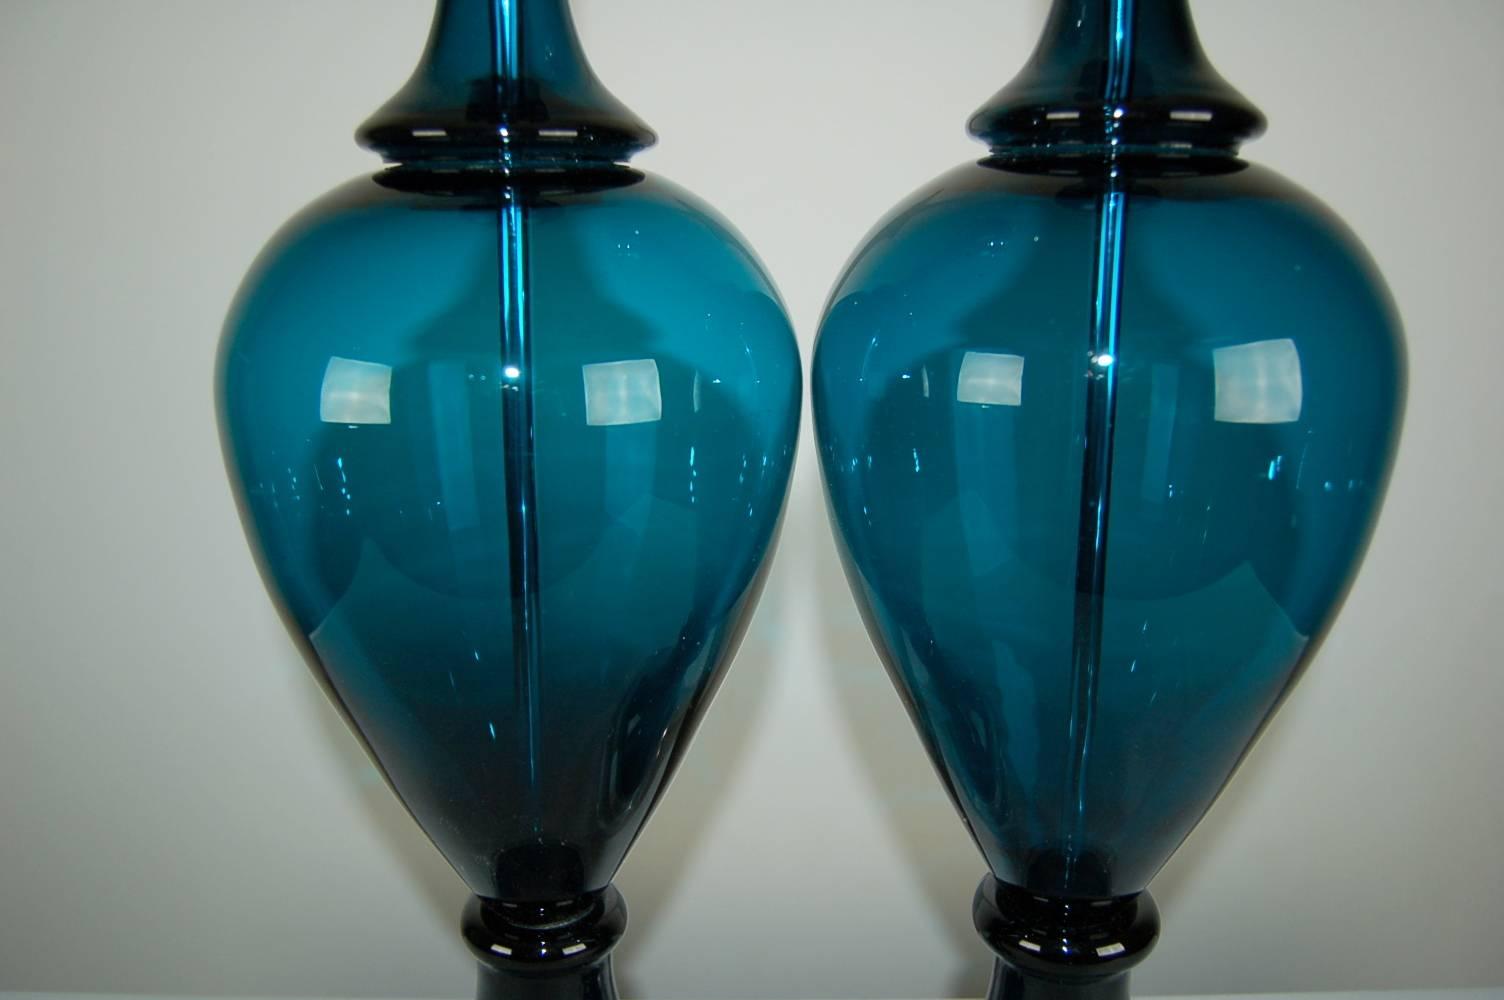 Matched Pair of Vintage Murano Lamps by Marbro in Teal 2